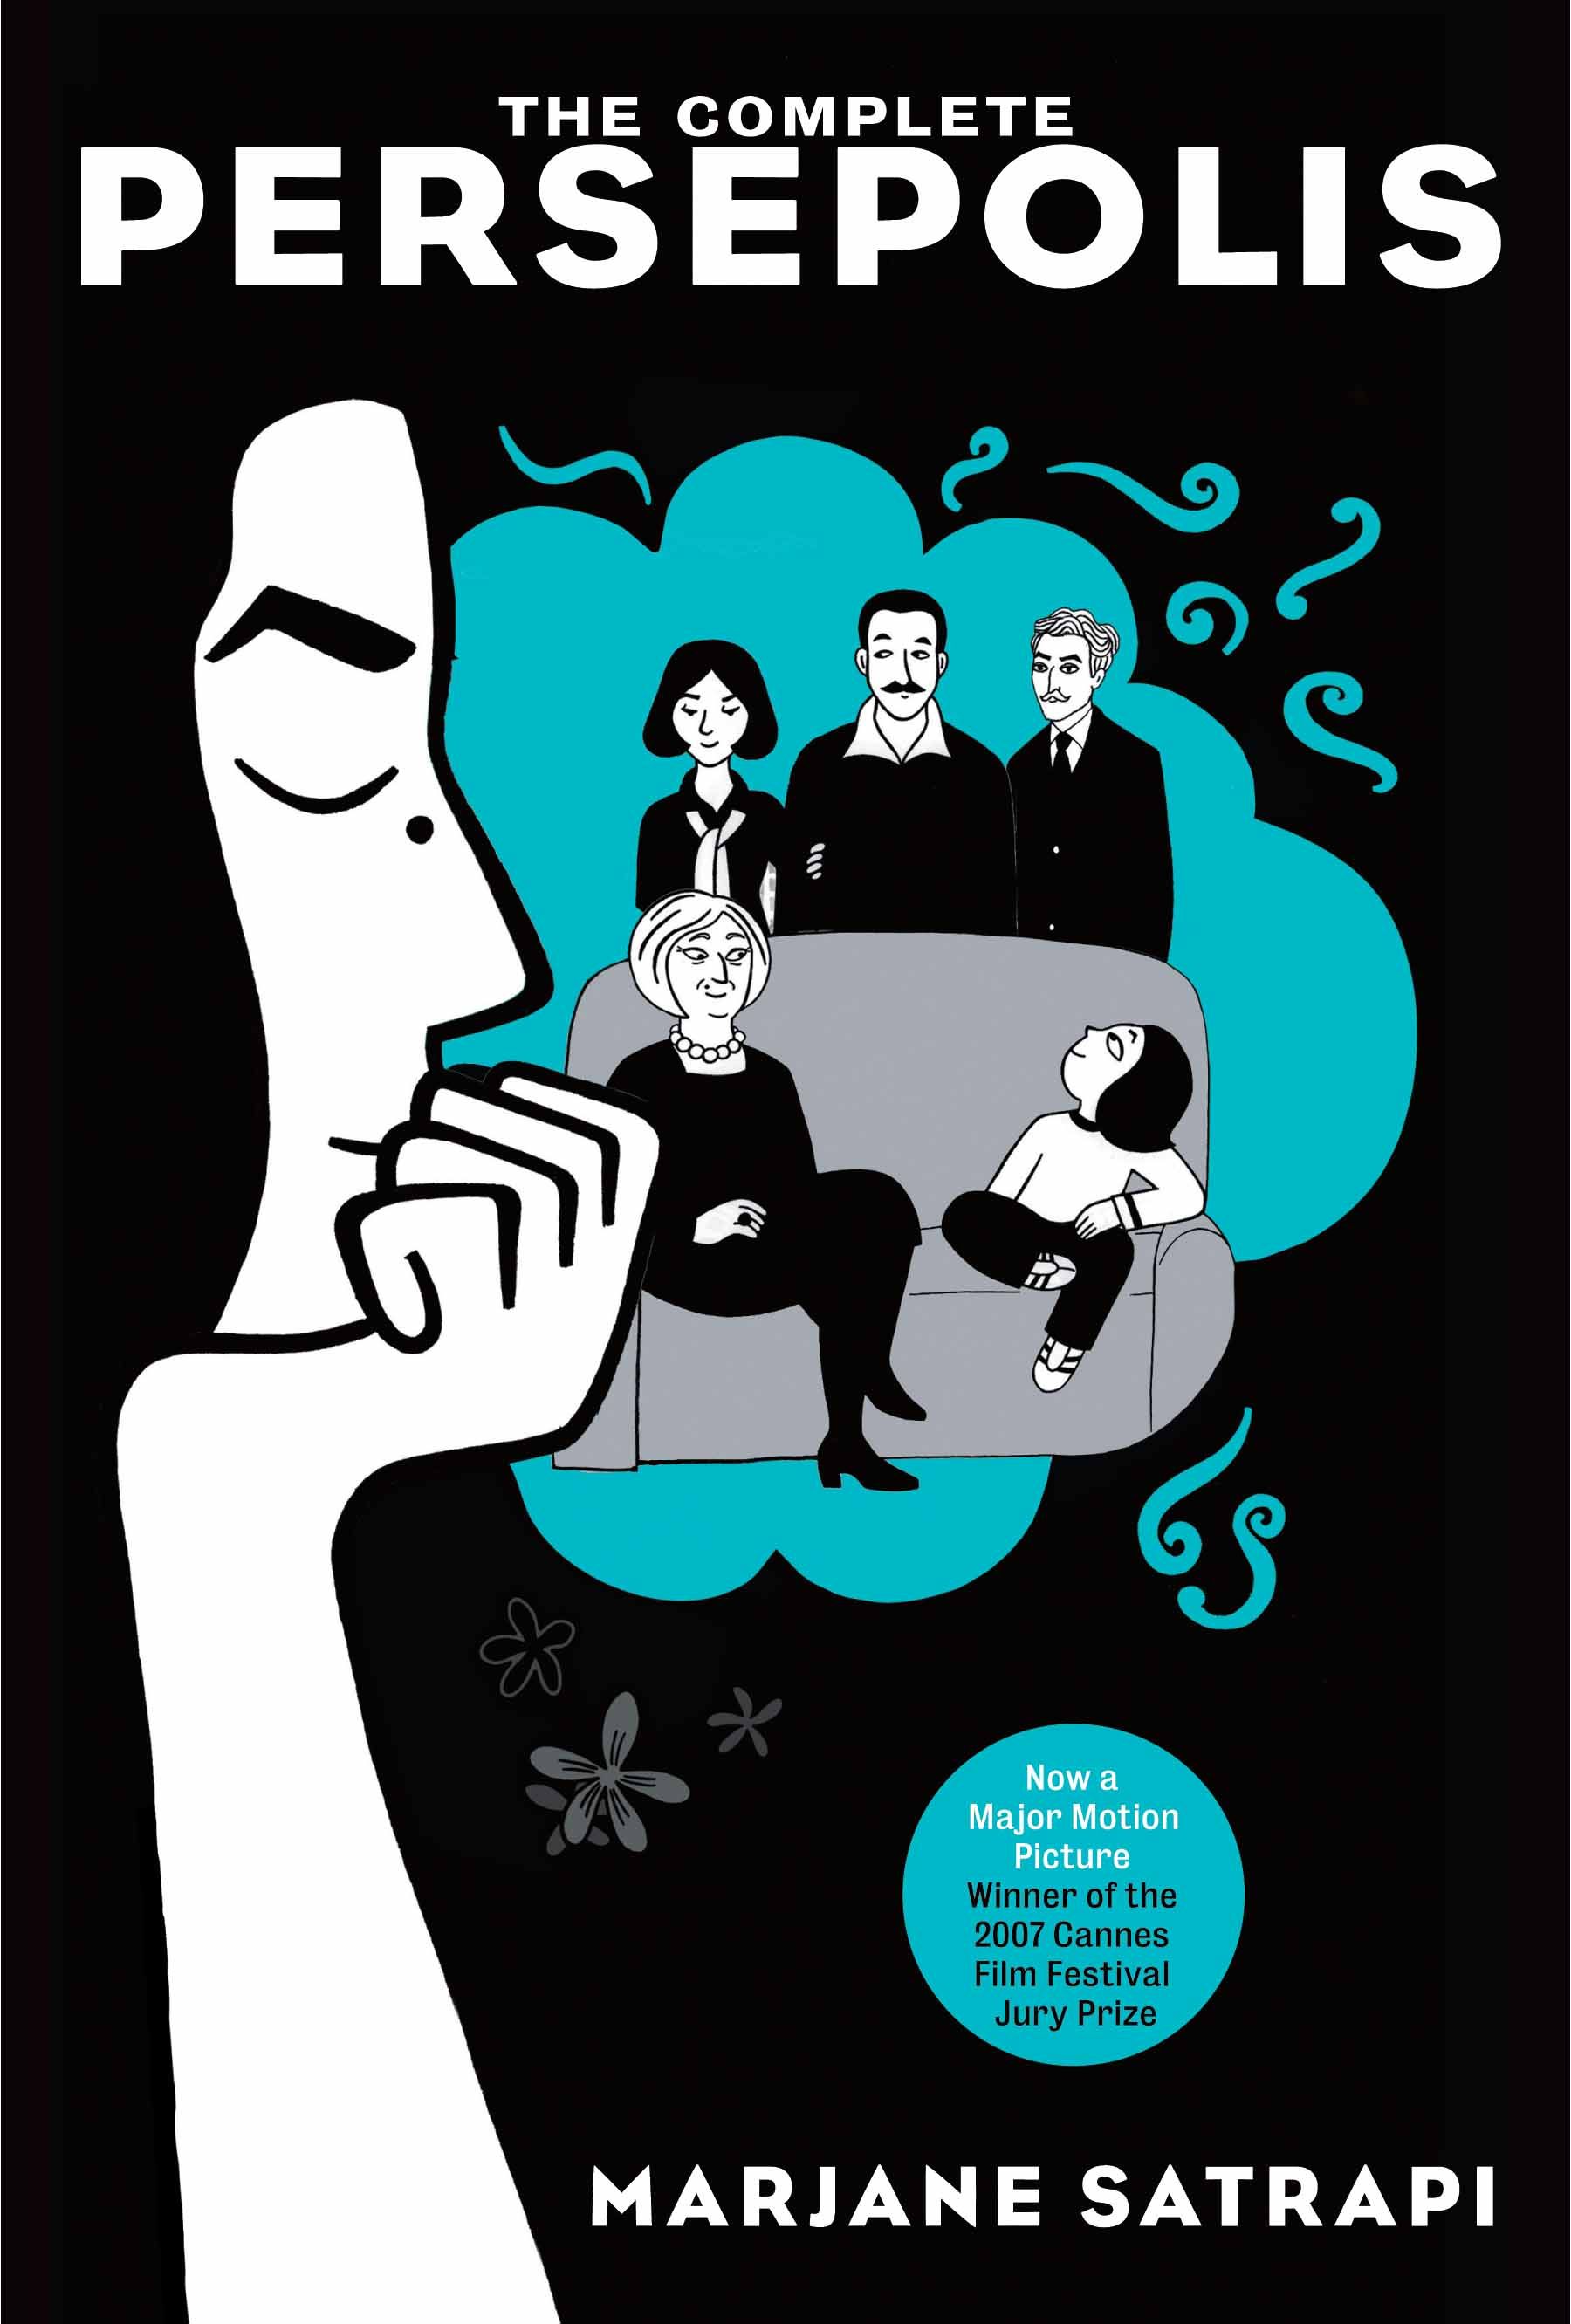 persepolis-reportedly-removed-from-chicago-public-schools-updated